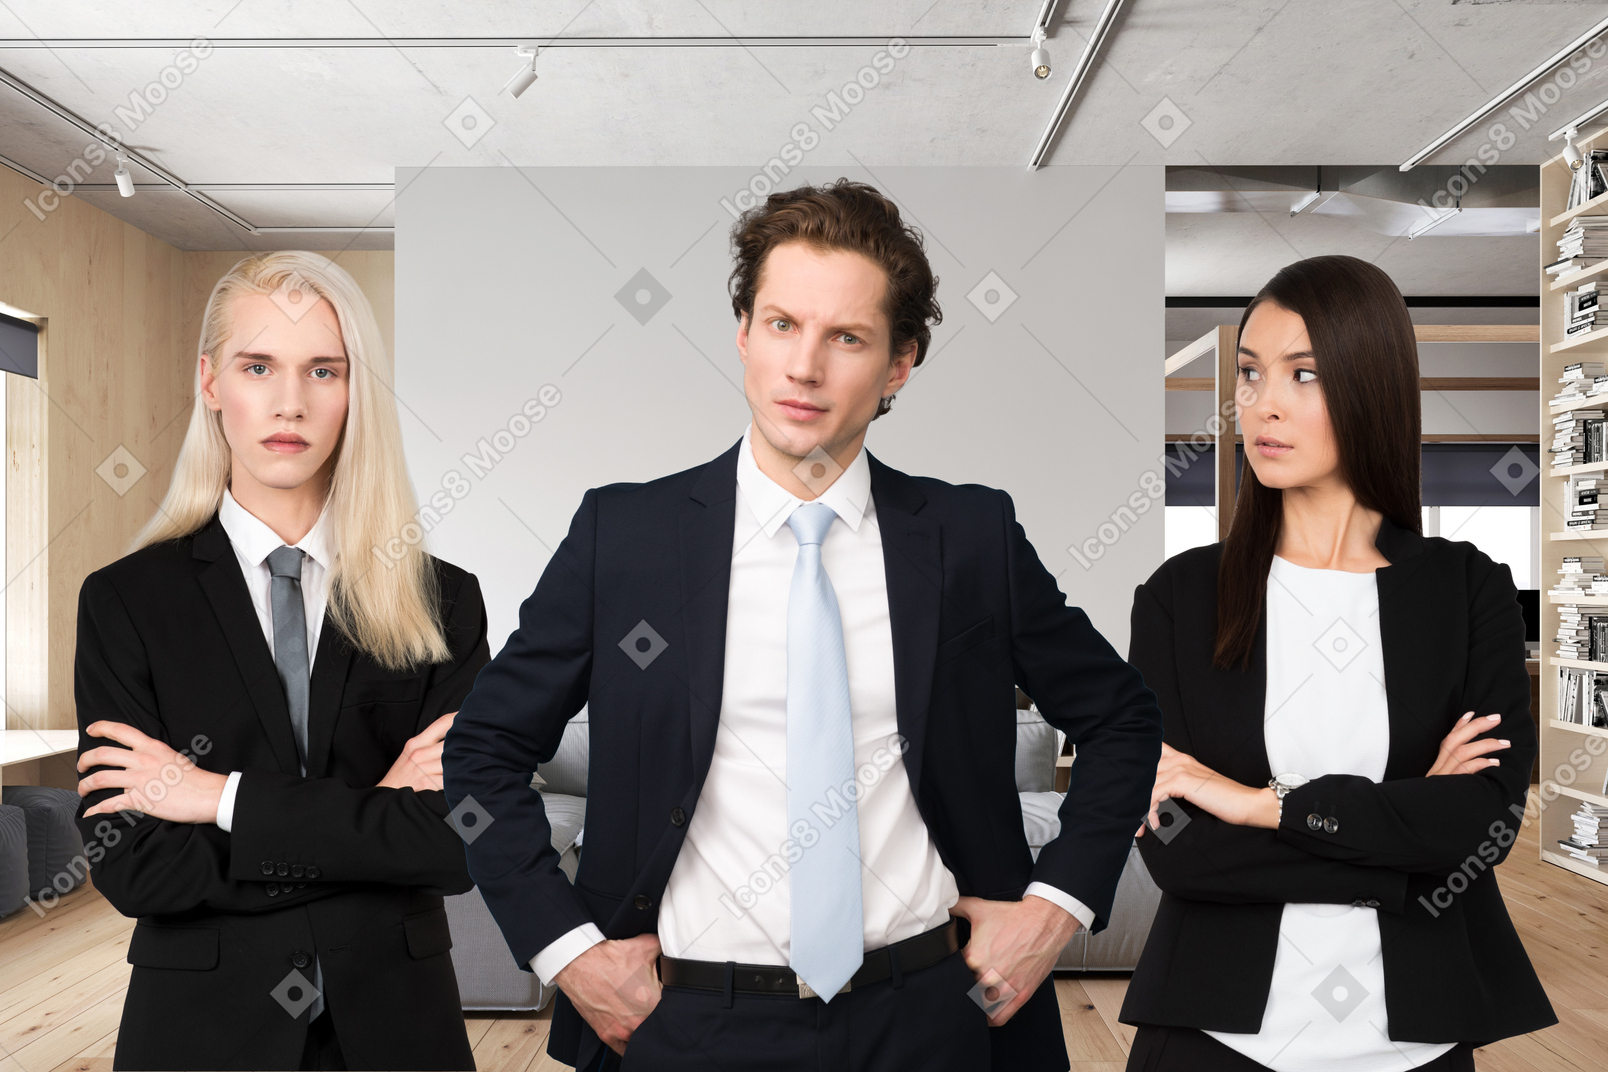 Business people standing in an office